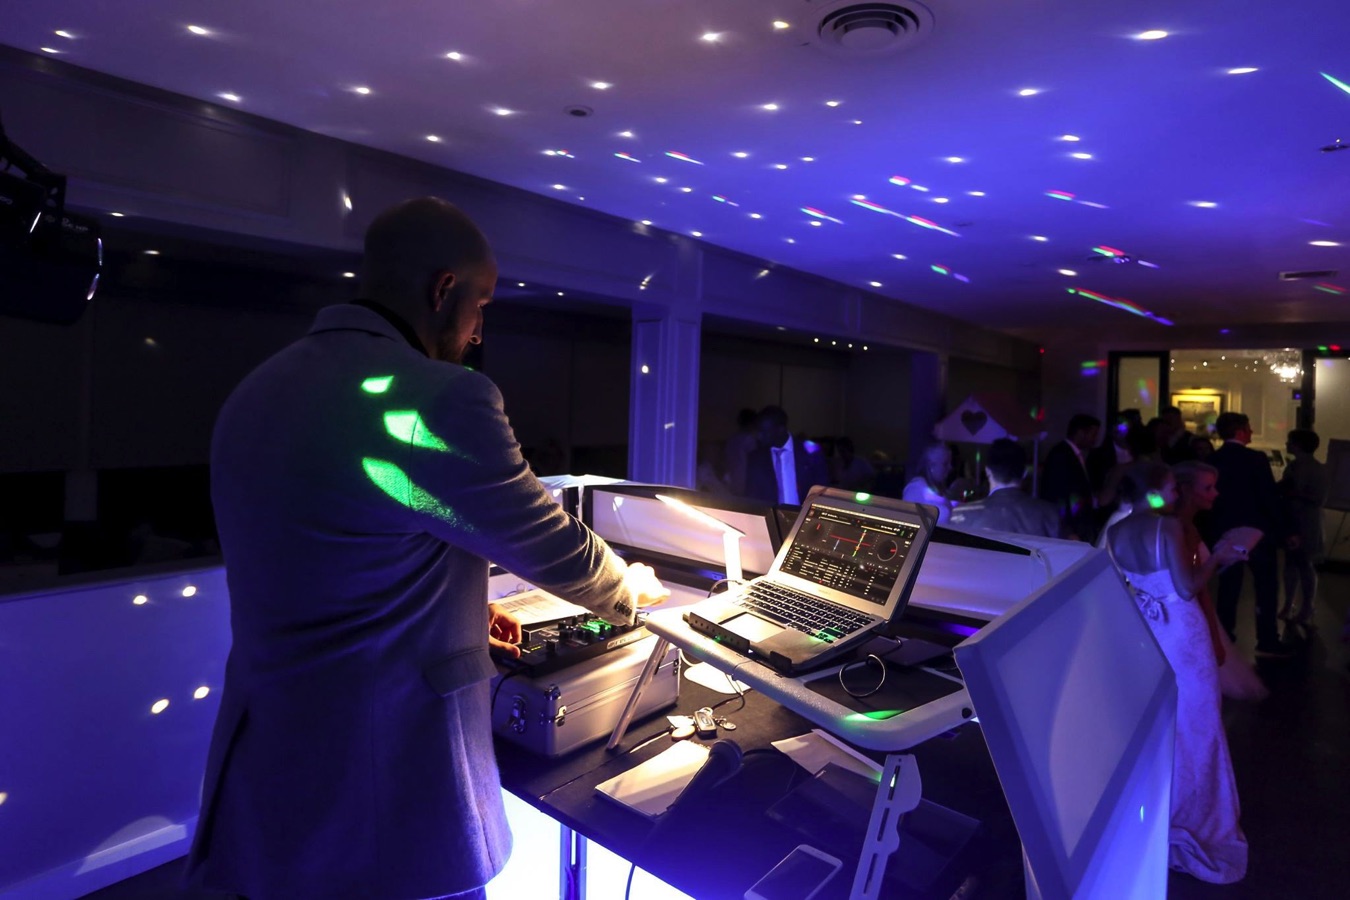 weddingpartydjs All Parties and Events